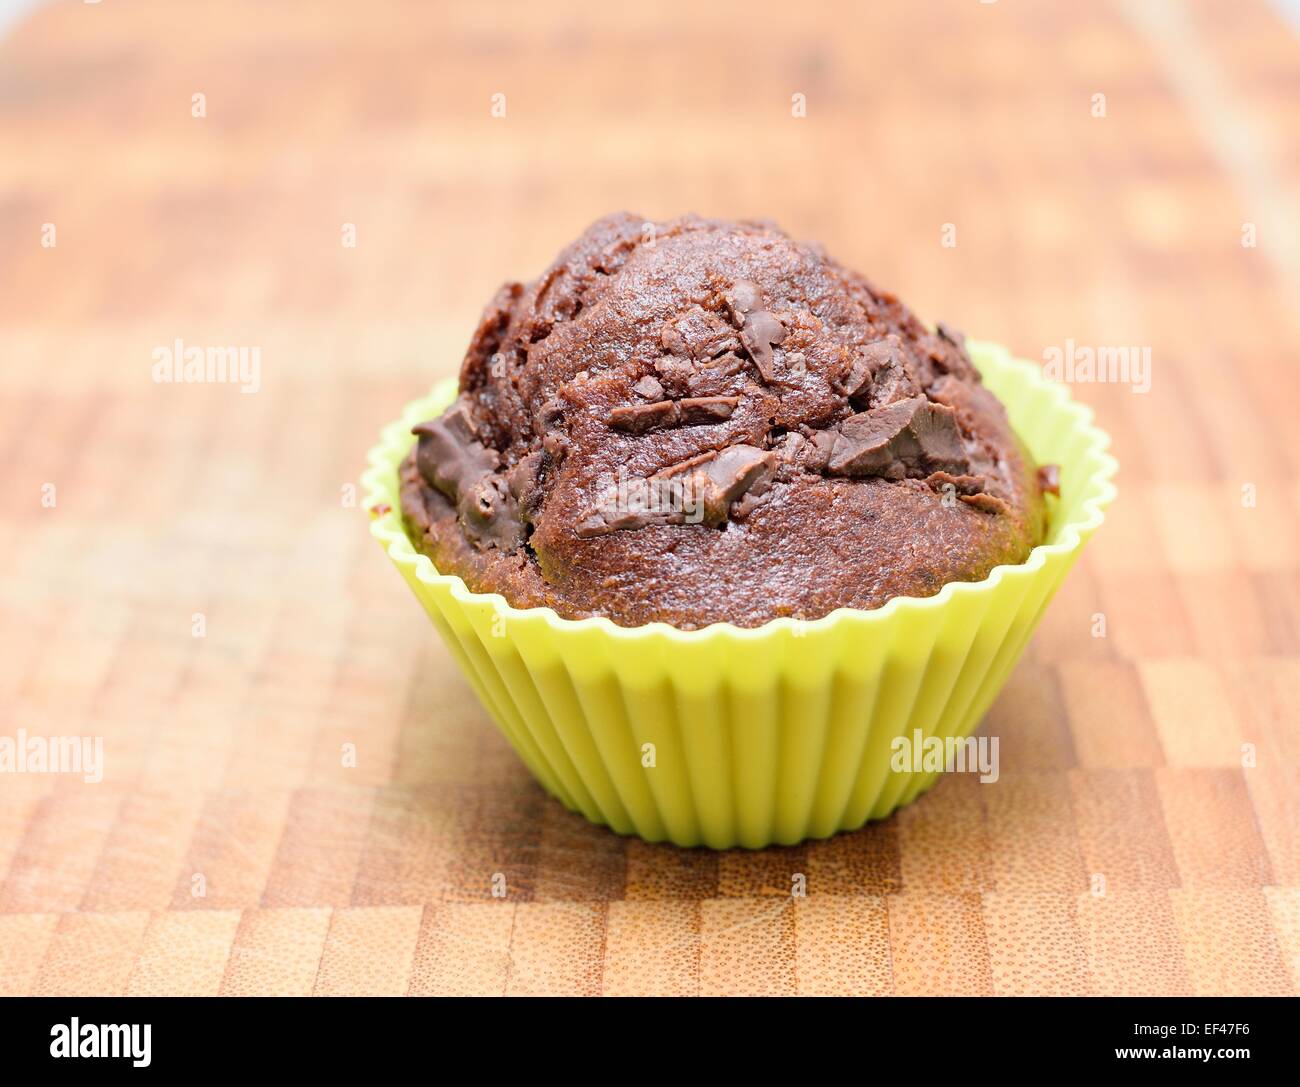 Chocolate muffin in the yellow silicone form on a wooden plate. Stock Photo